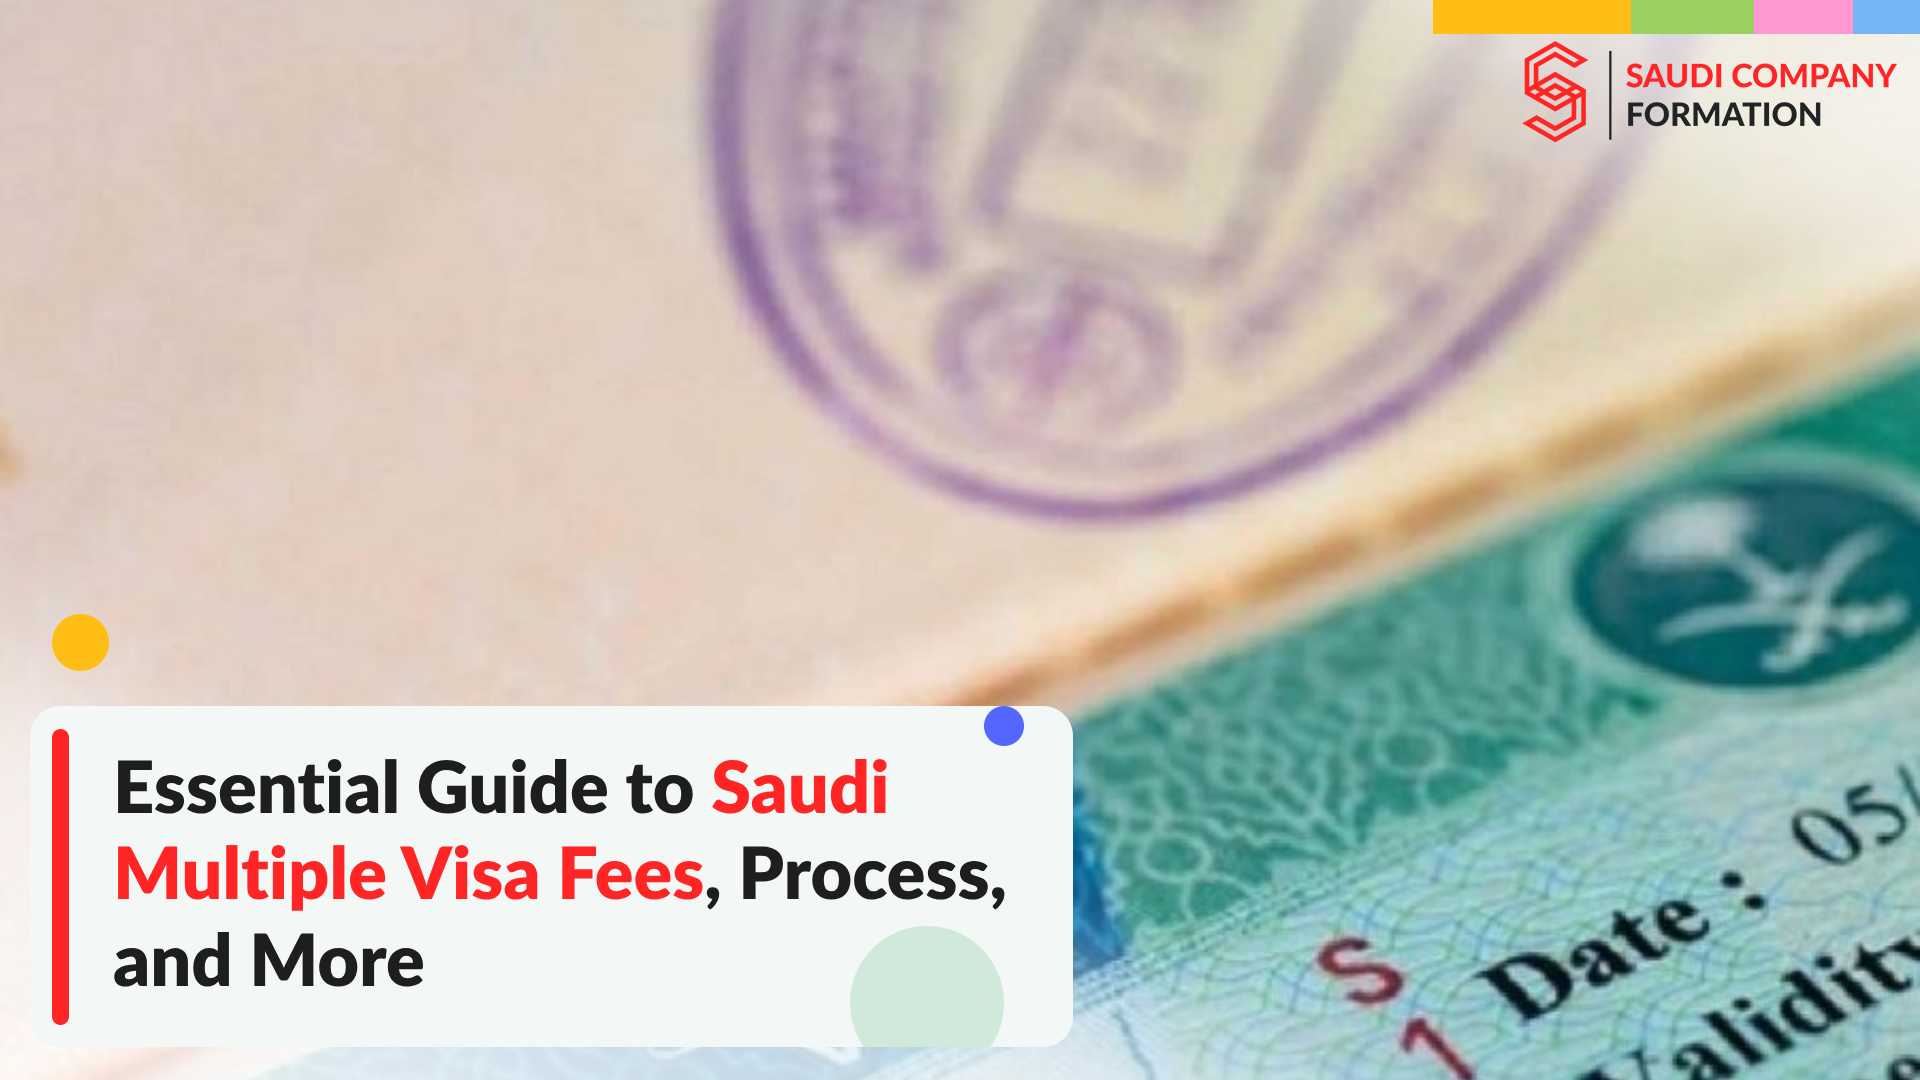 Essential Guide to Saudi Multiple Visa Fees, Process, and More.